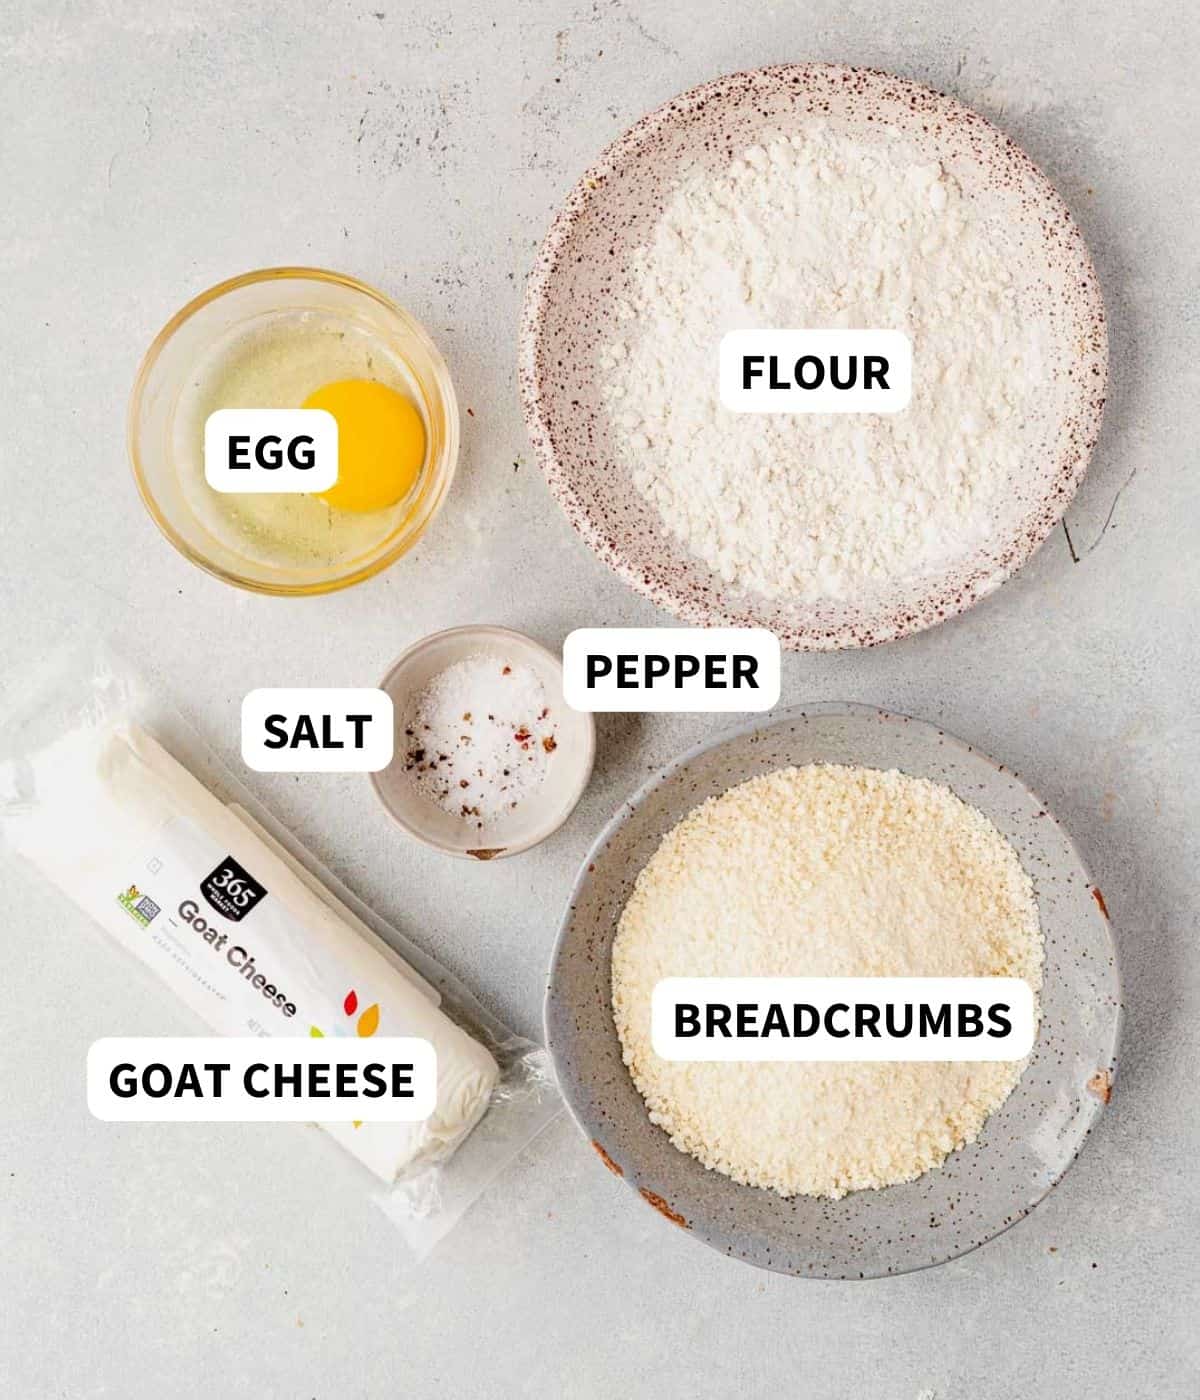 goat cheese, flour, egg, salt, and breadcrumbs on a countertop